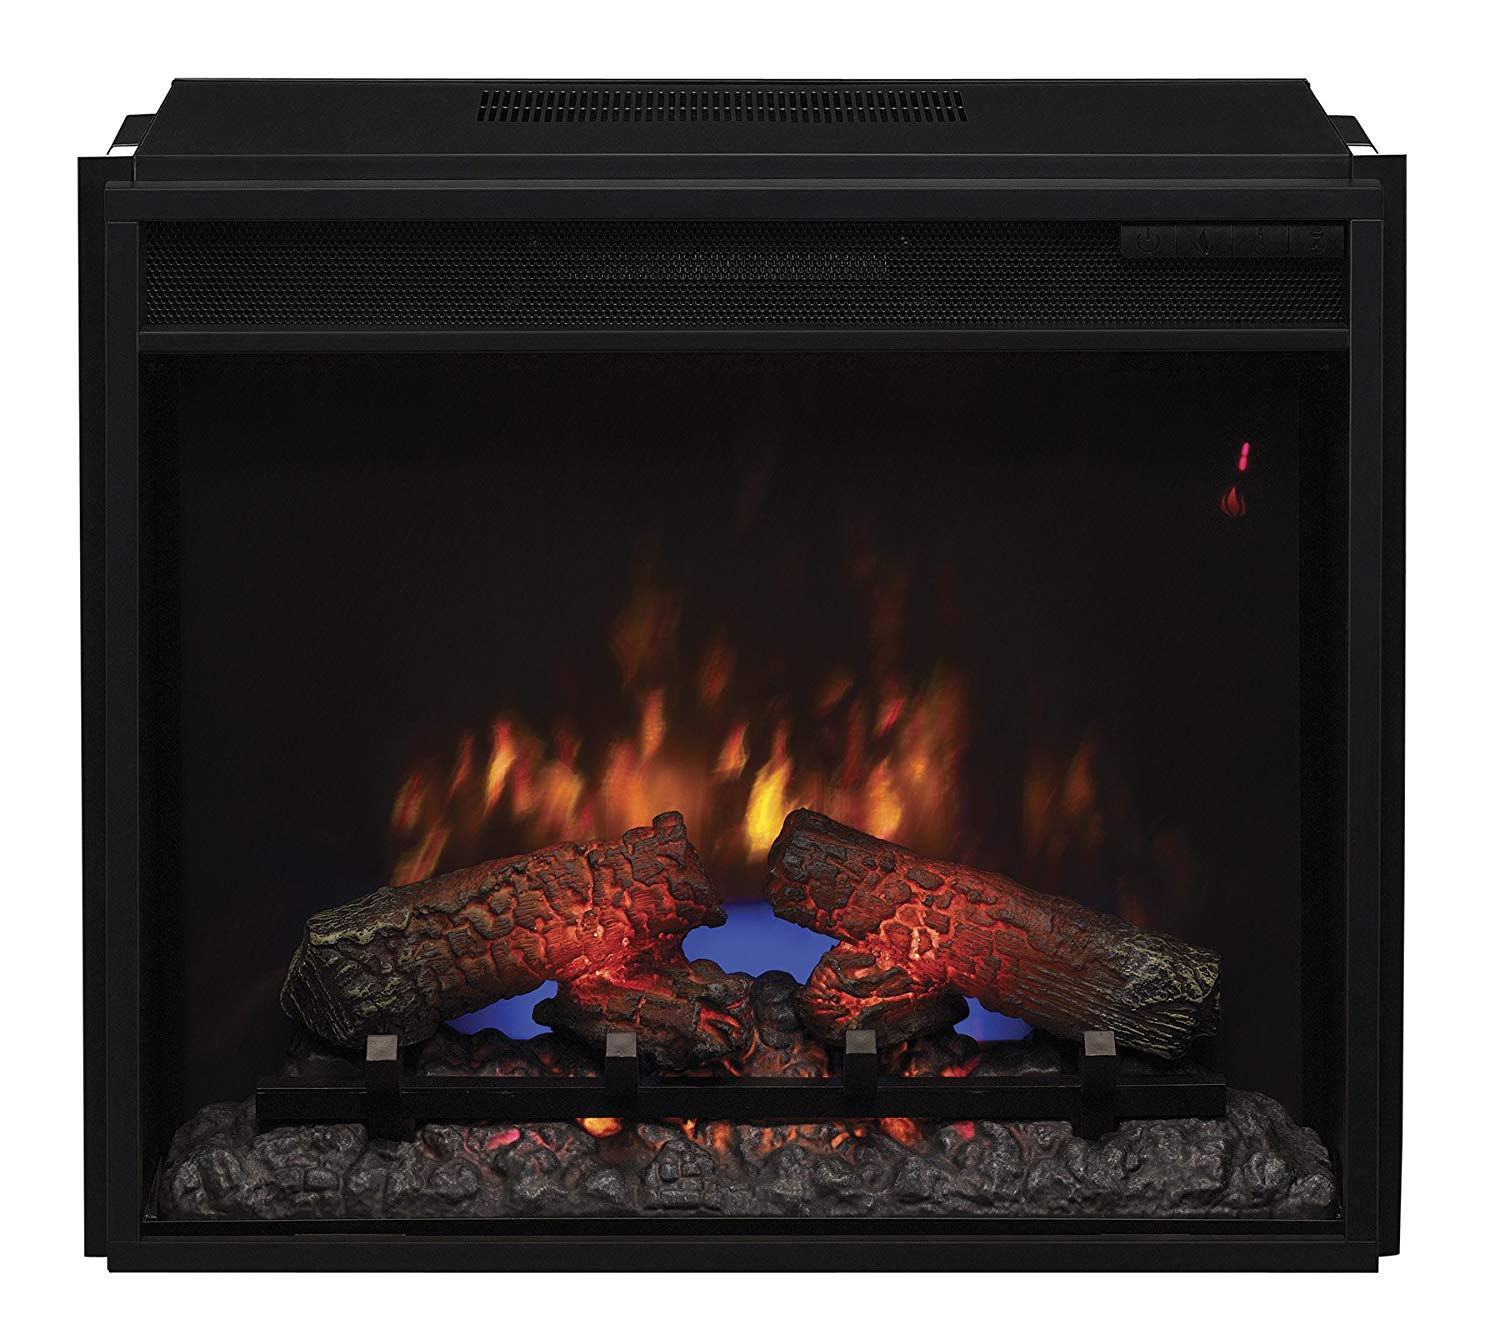 Ashley Wood Burning Fireplace Insert Beautiful Classicflame 23ef031grp 23" Electric Fireplace Insert with Safer Plug